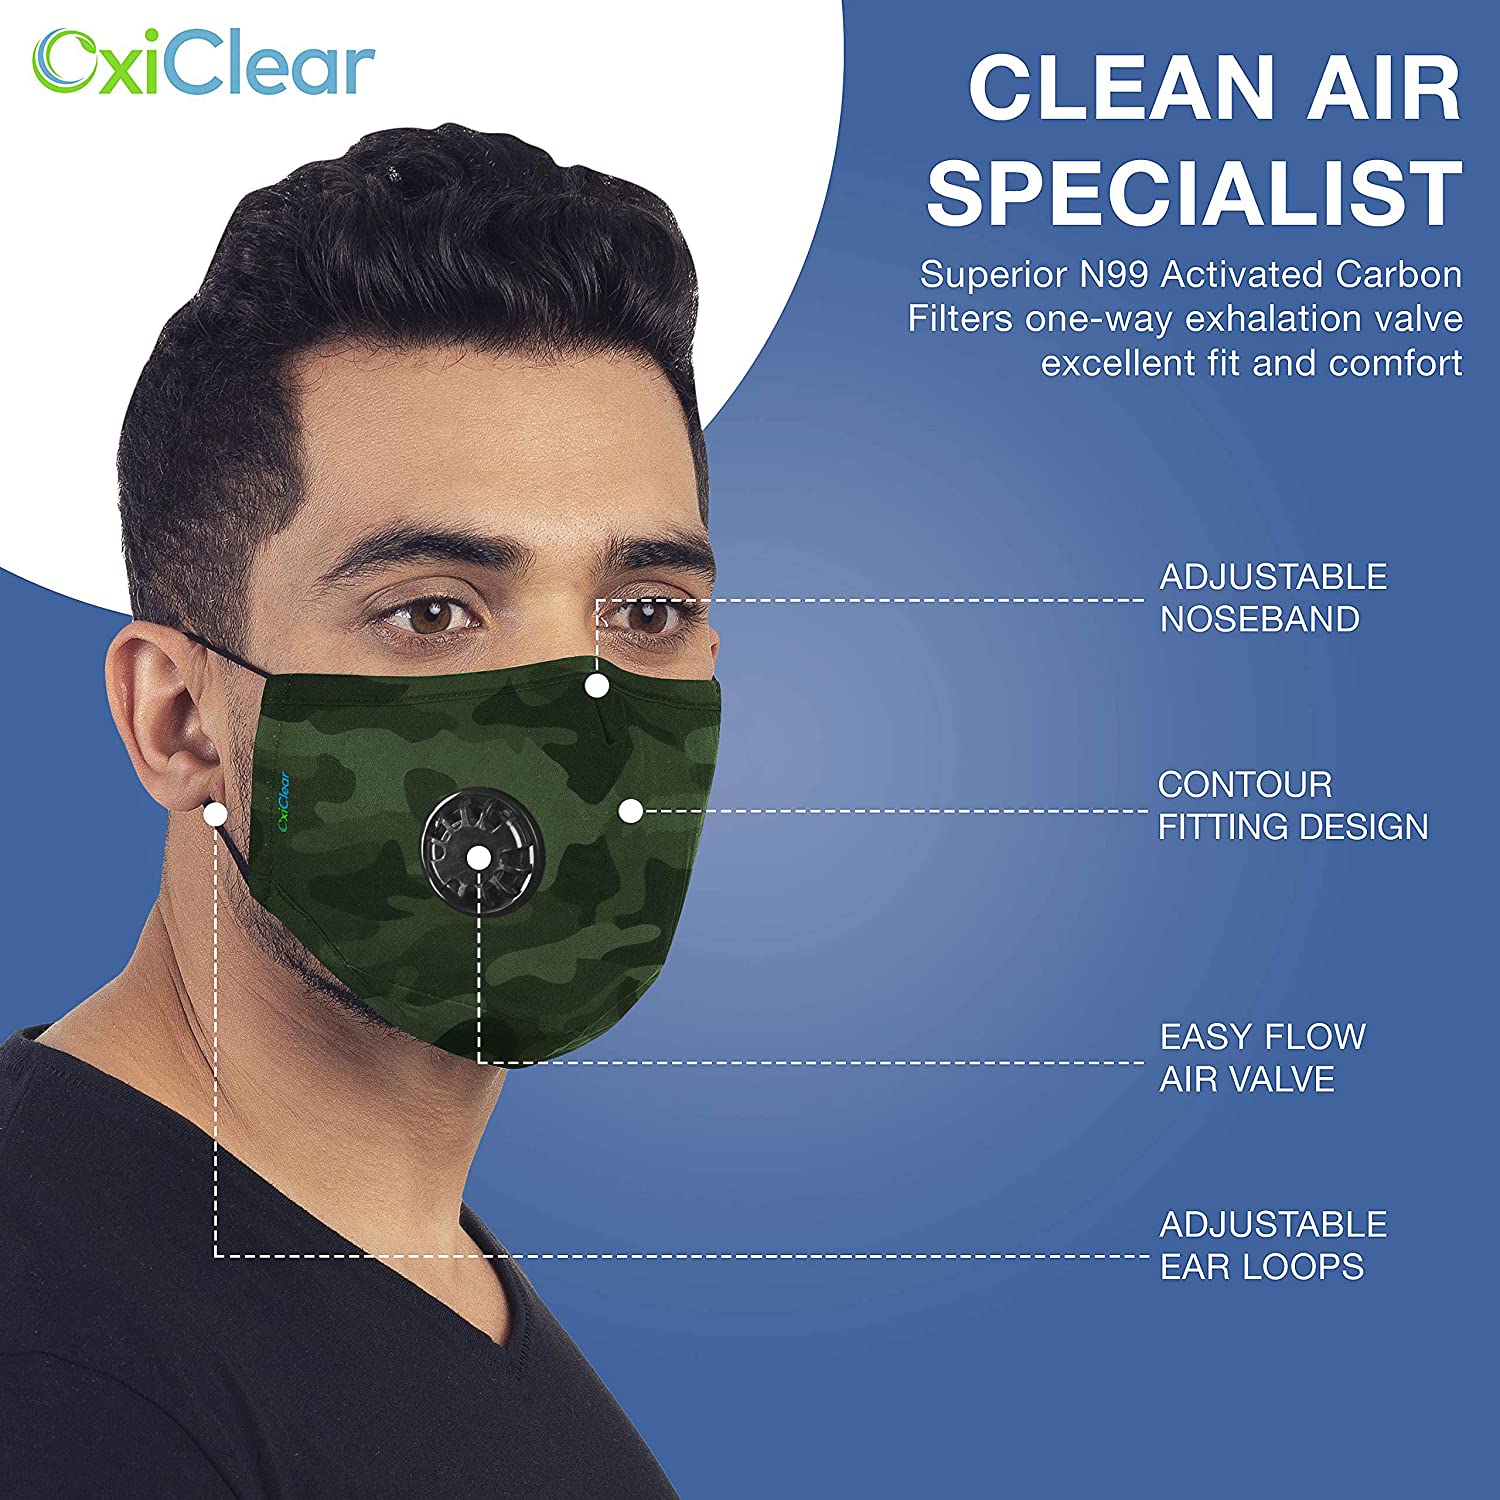 OxiClear N99 Anti Pollution Mask with Carbon Filters Headband Reusable D.R.D.O Certified (Combat)